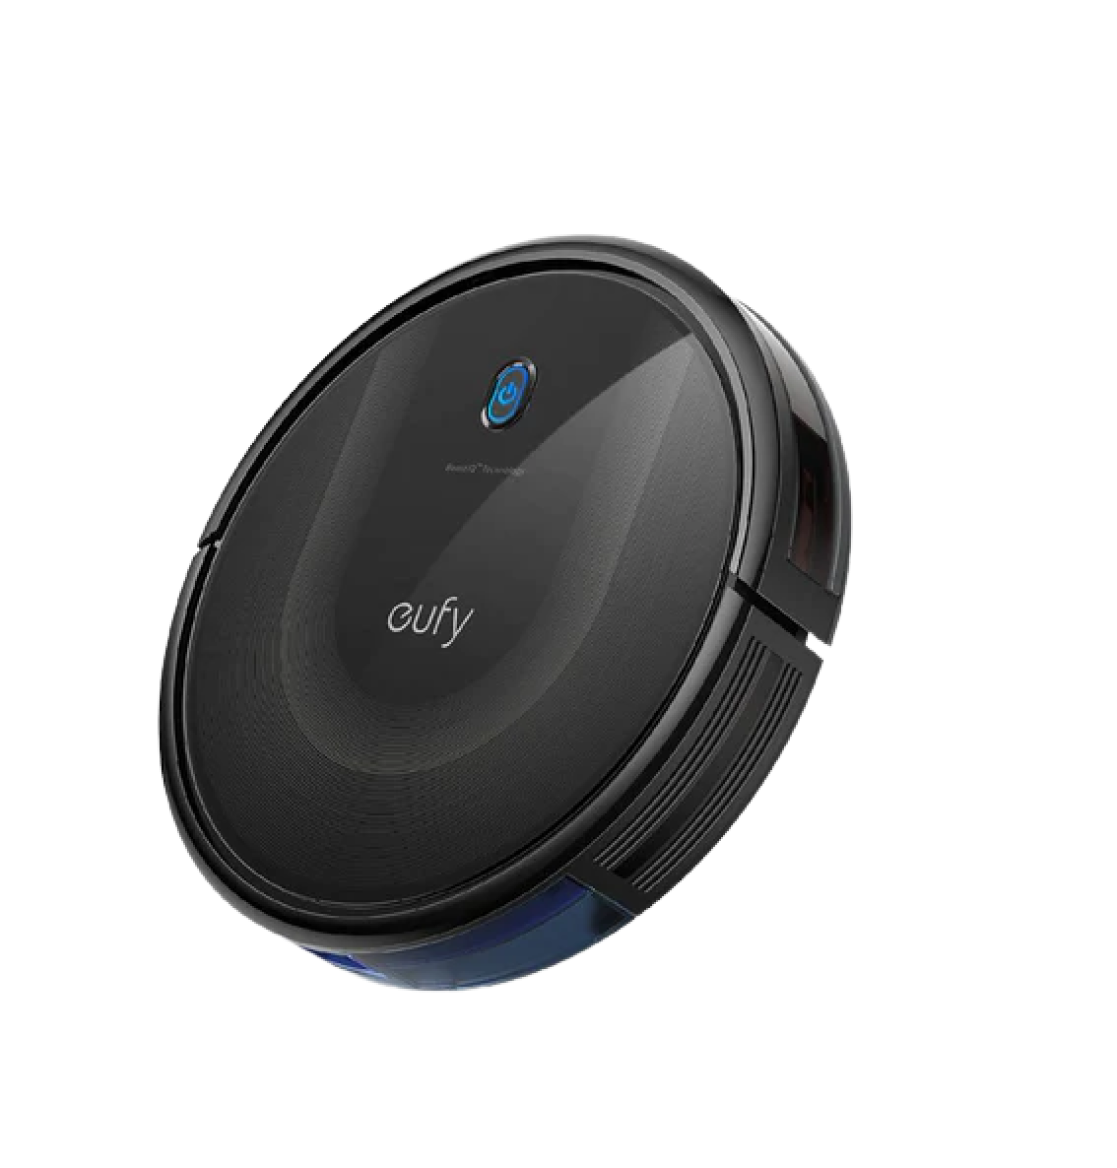 Discover eufy Robot Vacuums' Power of Smart Cleaning | eufy CA